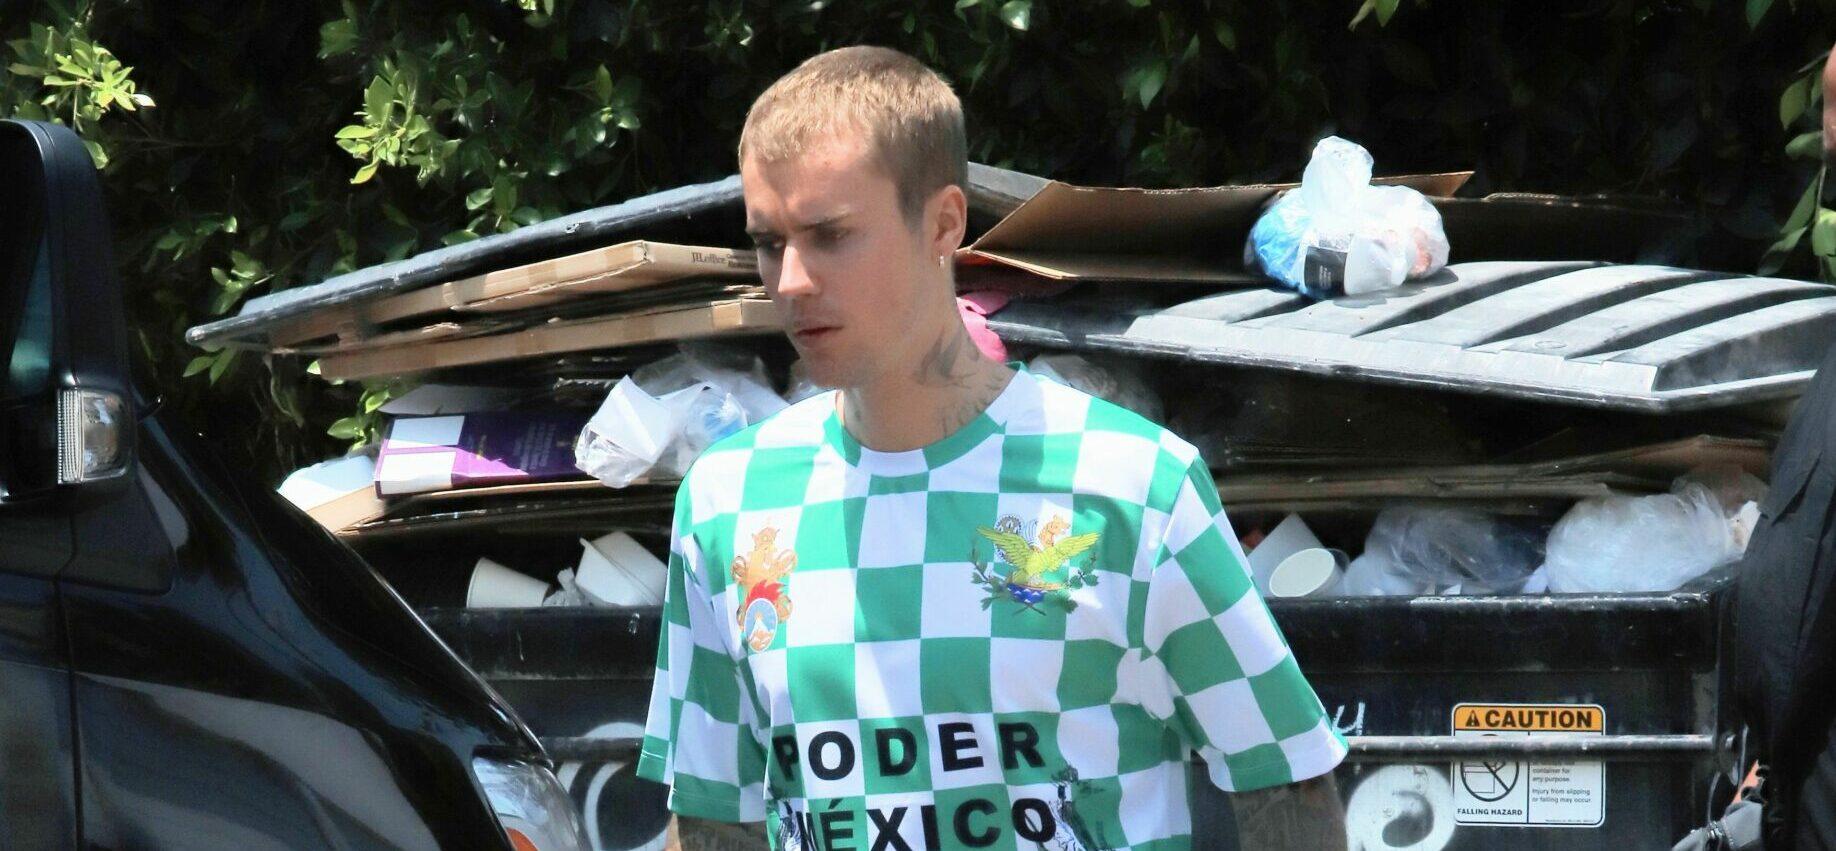 Justin Bieber reps team Mexico in the World Cup as he stops at cannabis store Wonderbrett